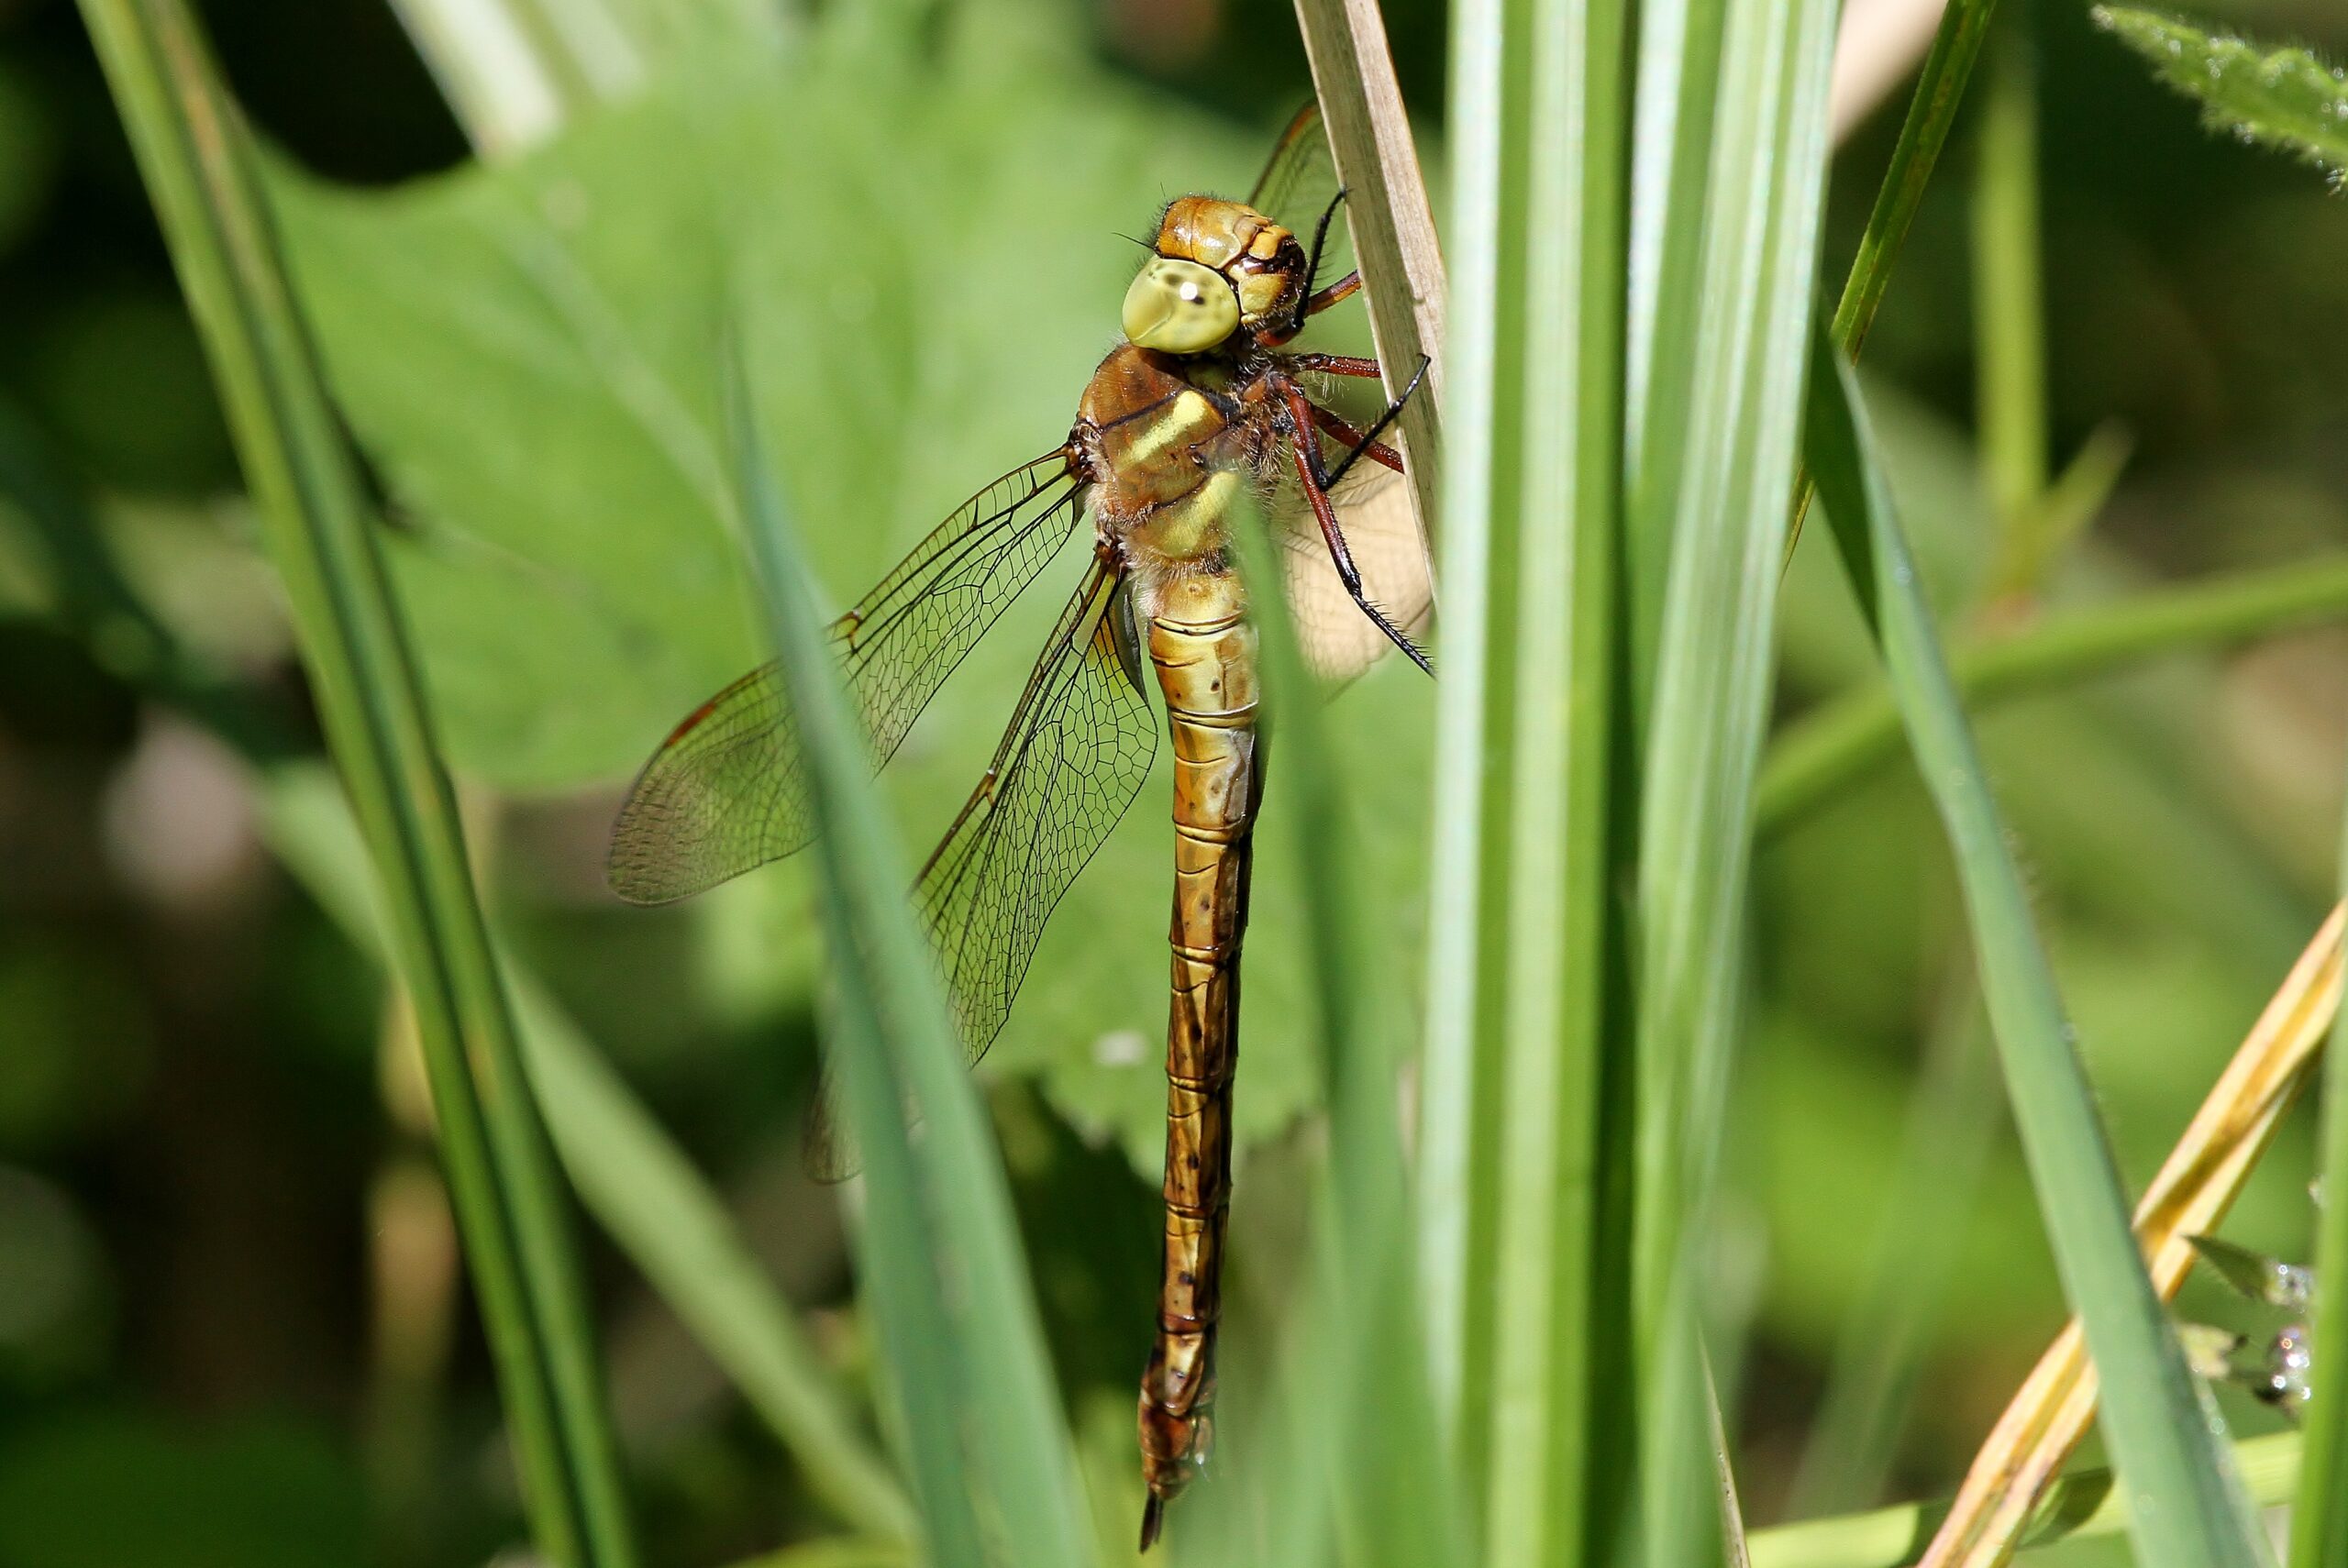 Norfolk Hawker Dragonfly perched on a plant in the sun.